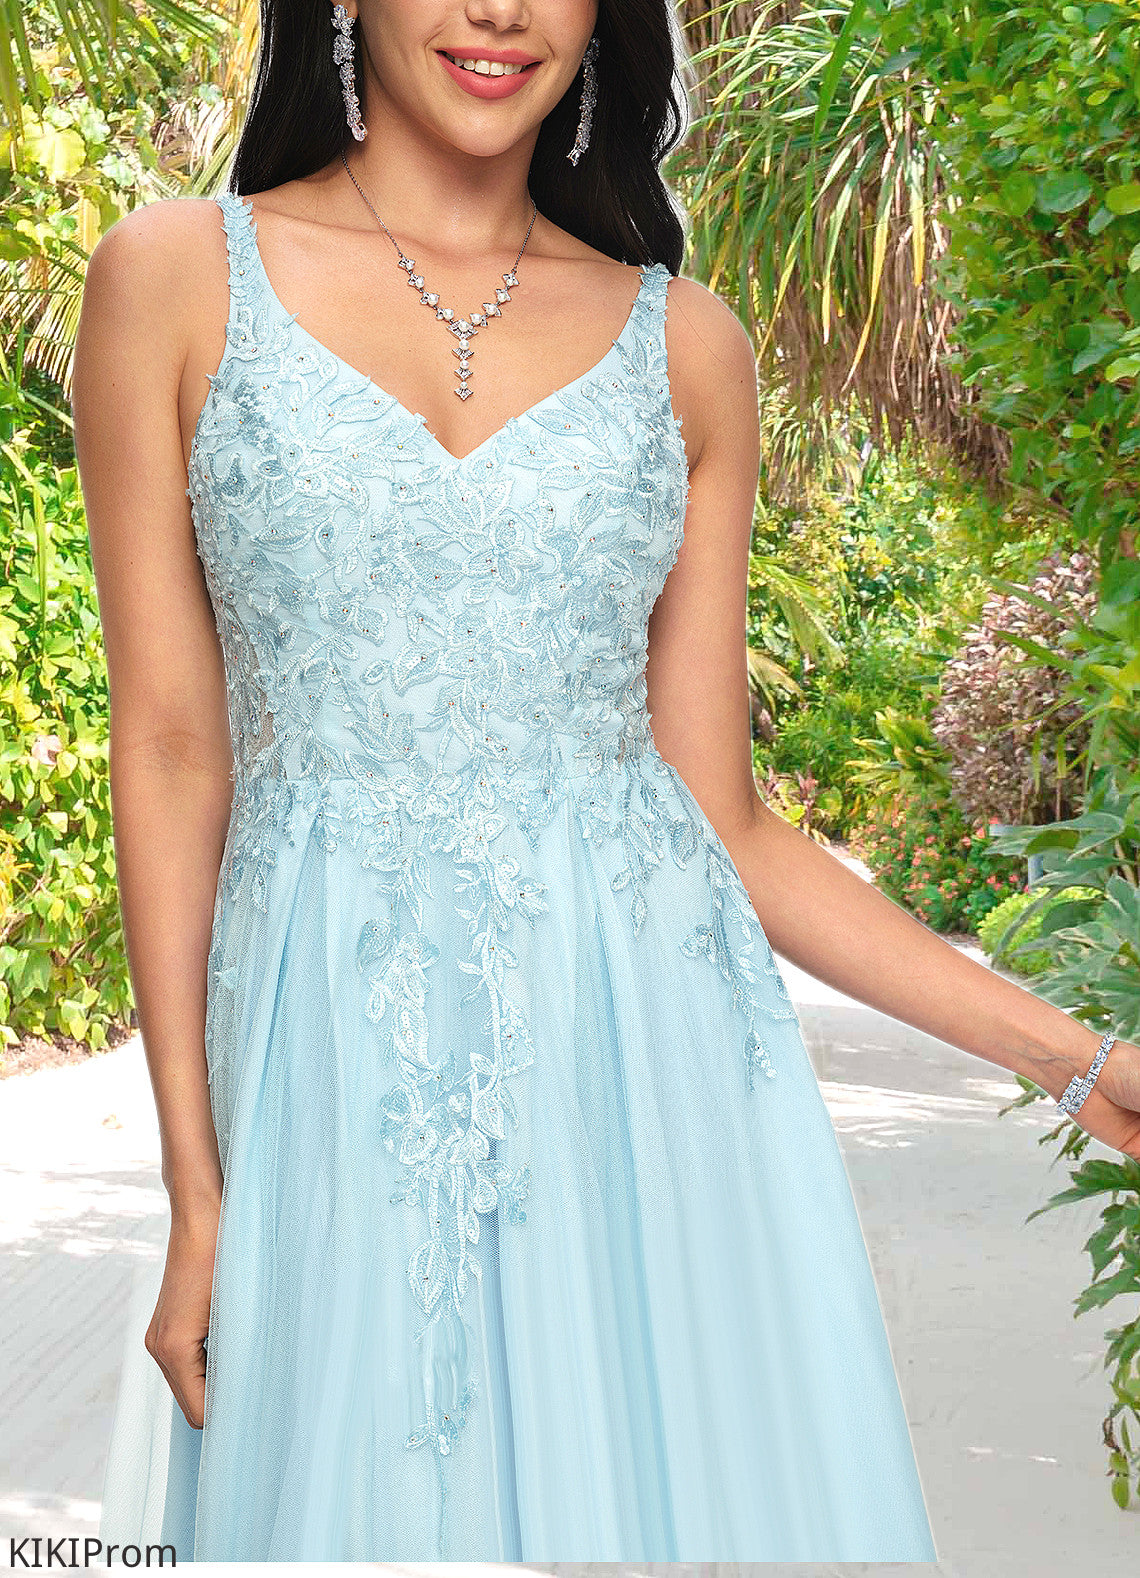 Laura A-line V-Neck Floor-Length Tulle Prom Dresses With Rhinestone Appliques Lace Sequins DZP0022225